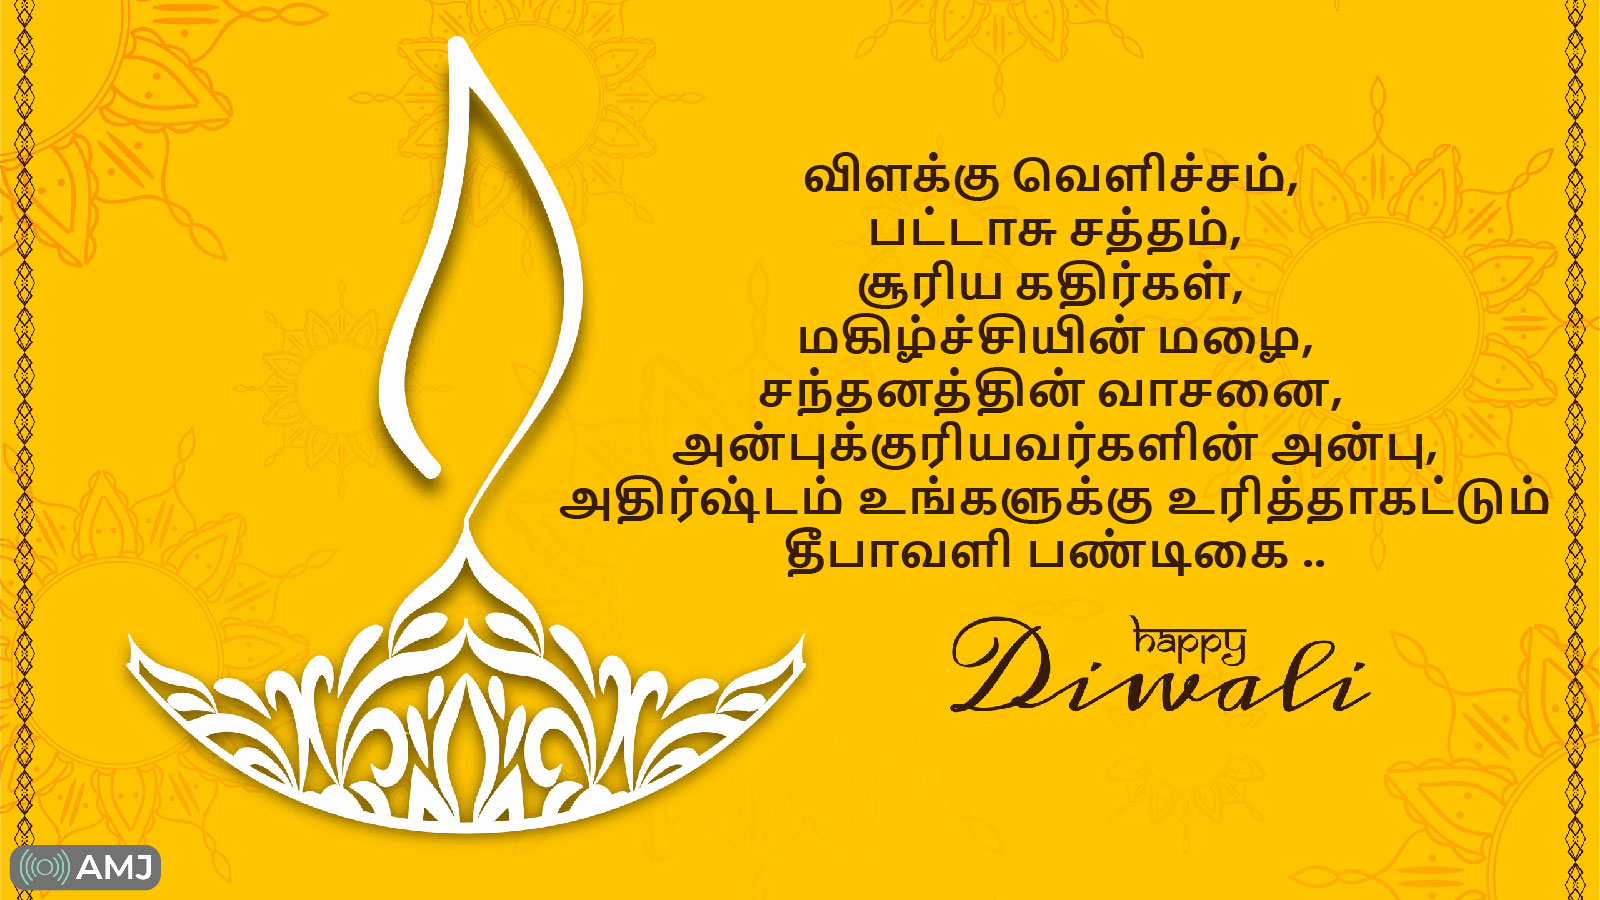 Happy Diwali 2022: Deepavali Wishes & Quotes with Images in Tamil Font - AMJ